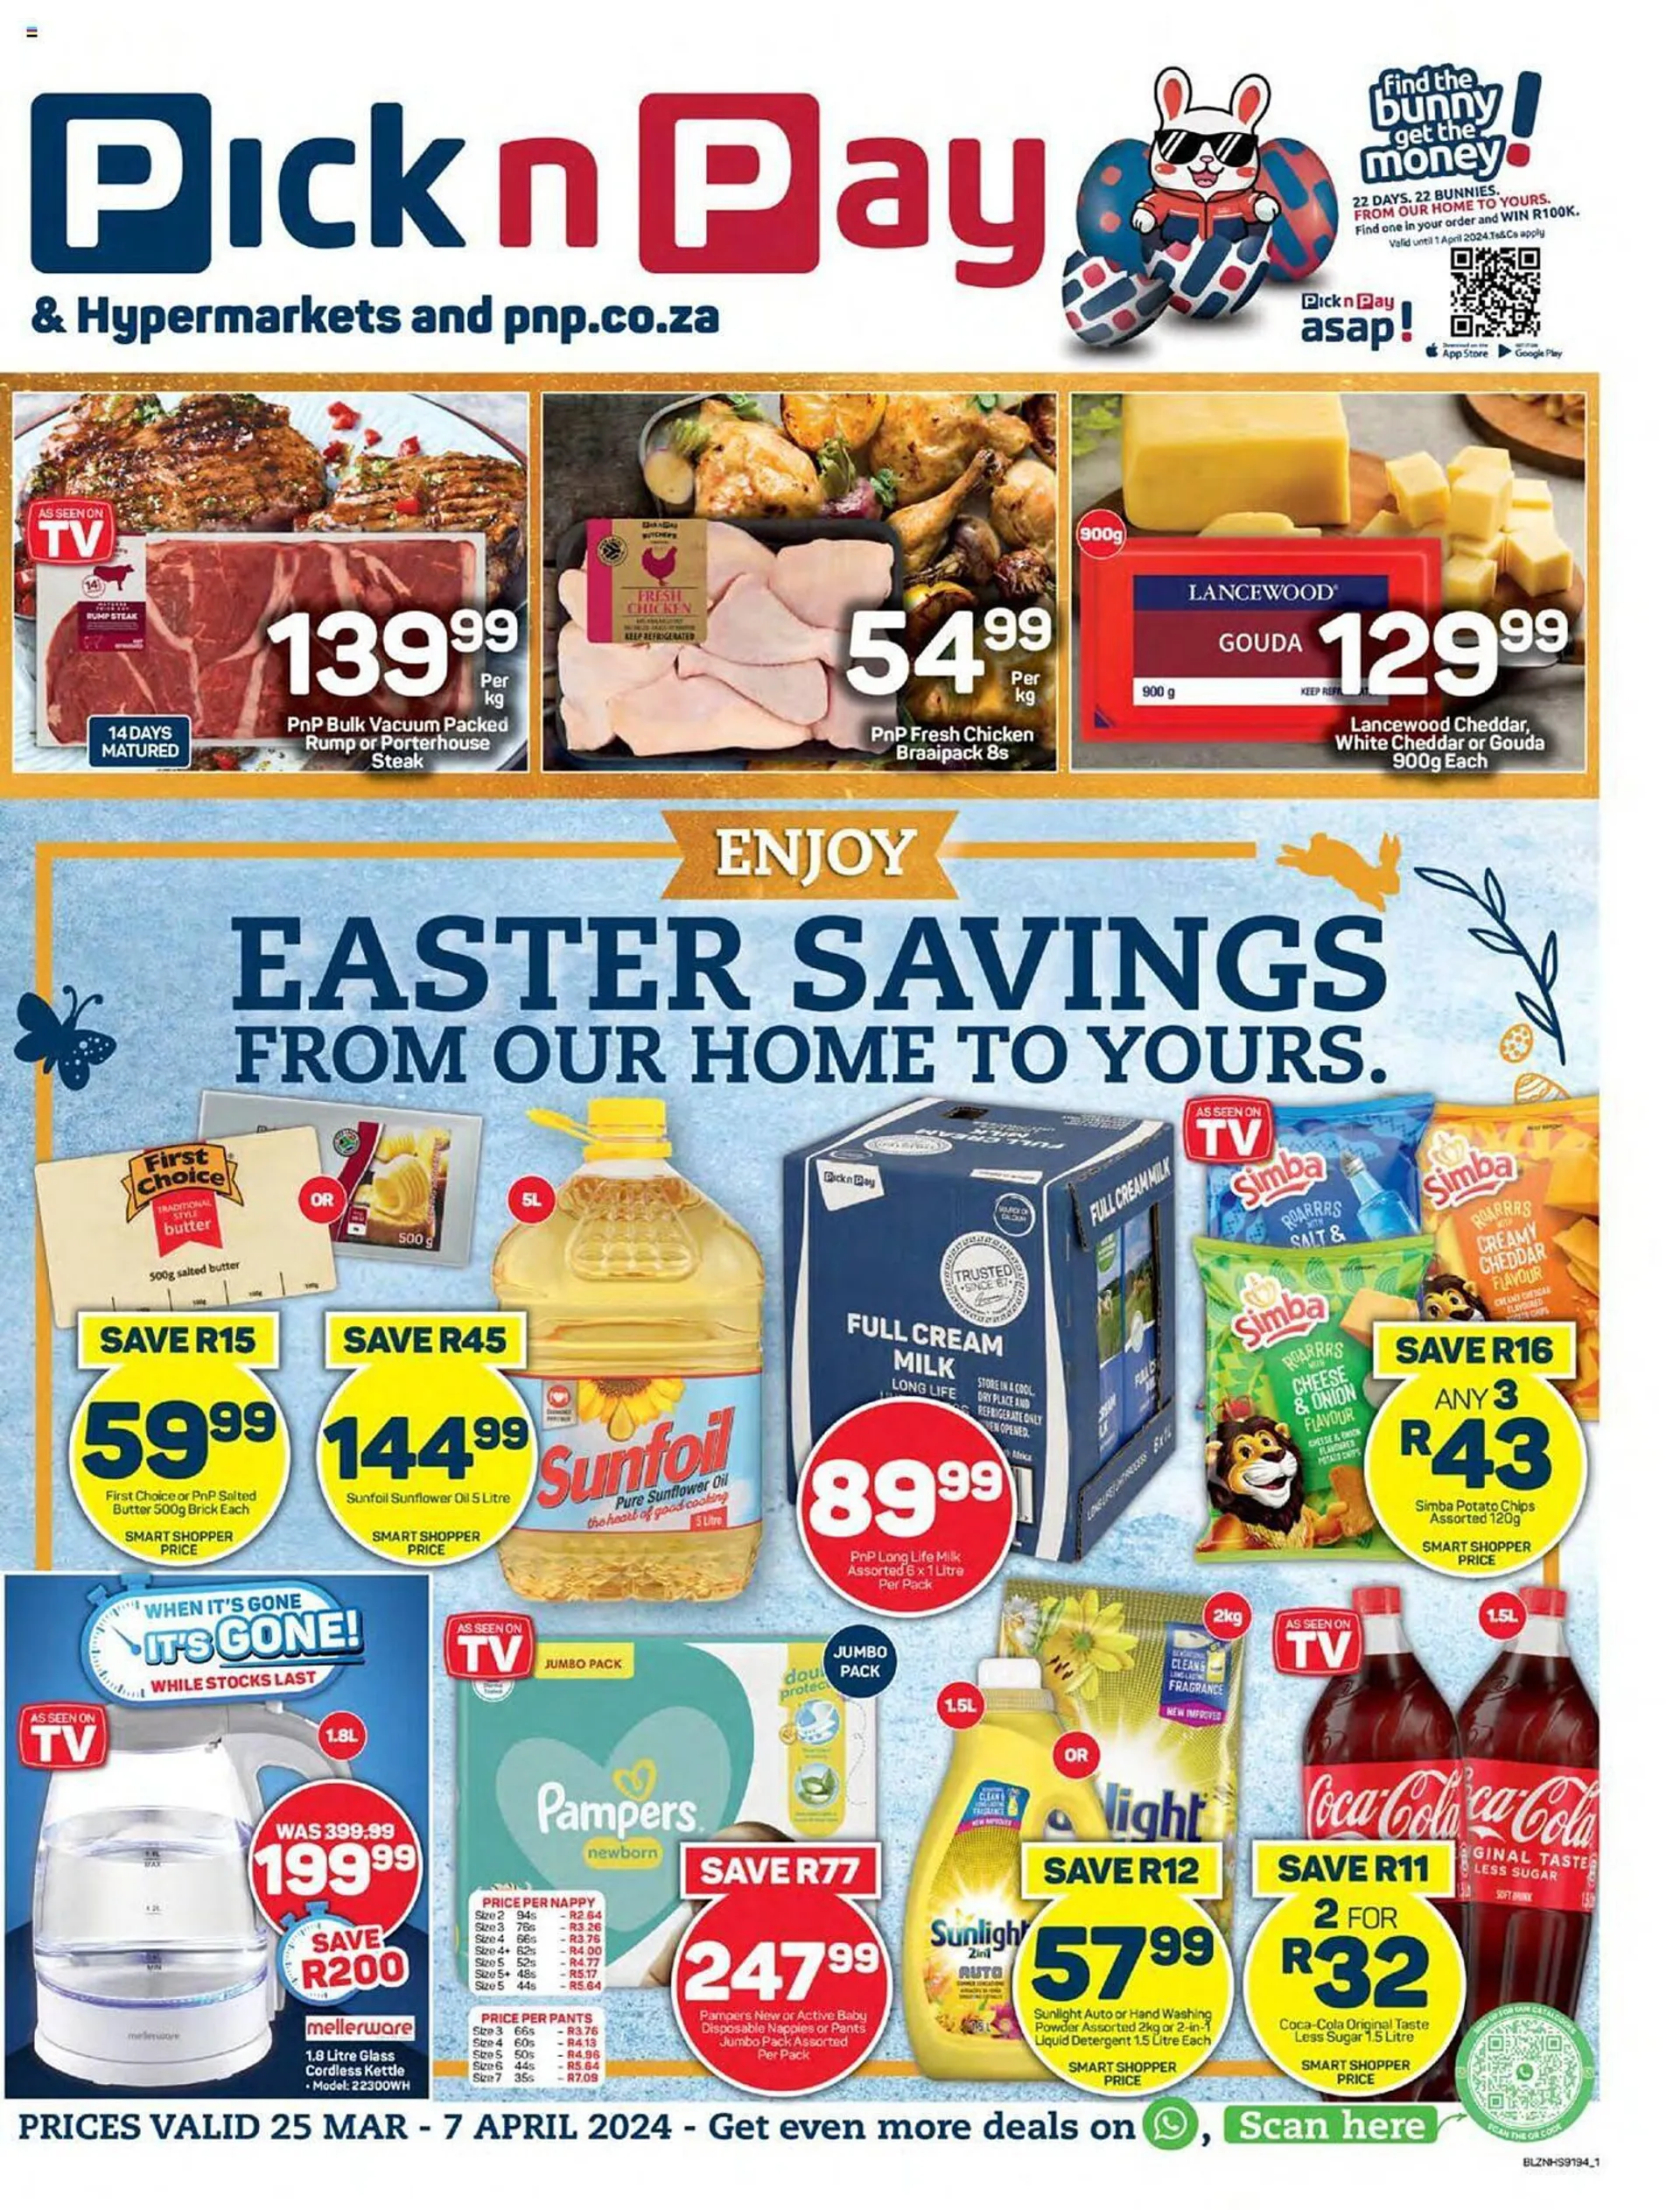 Pick n Pay catalogue - 25 March 7 April 2024 - Page 1